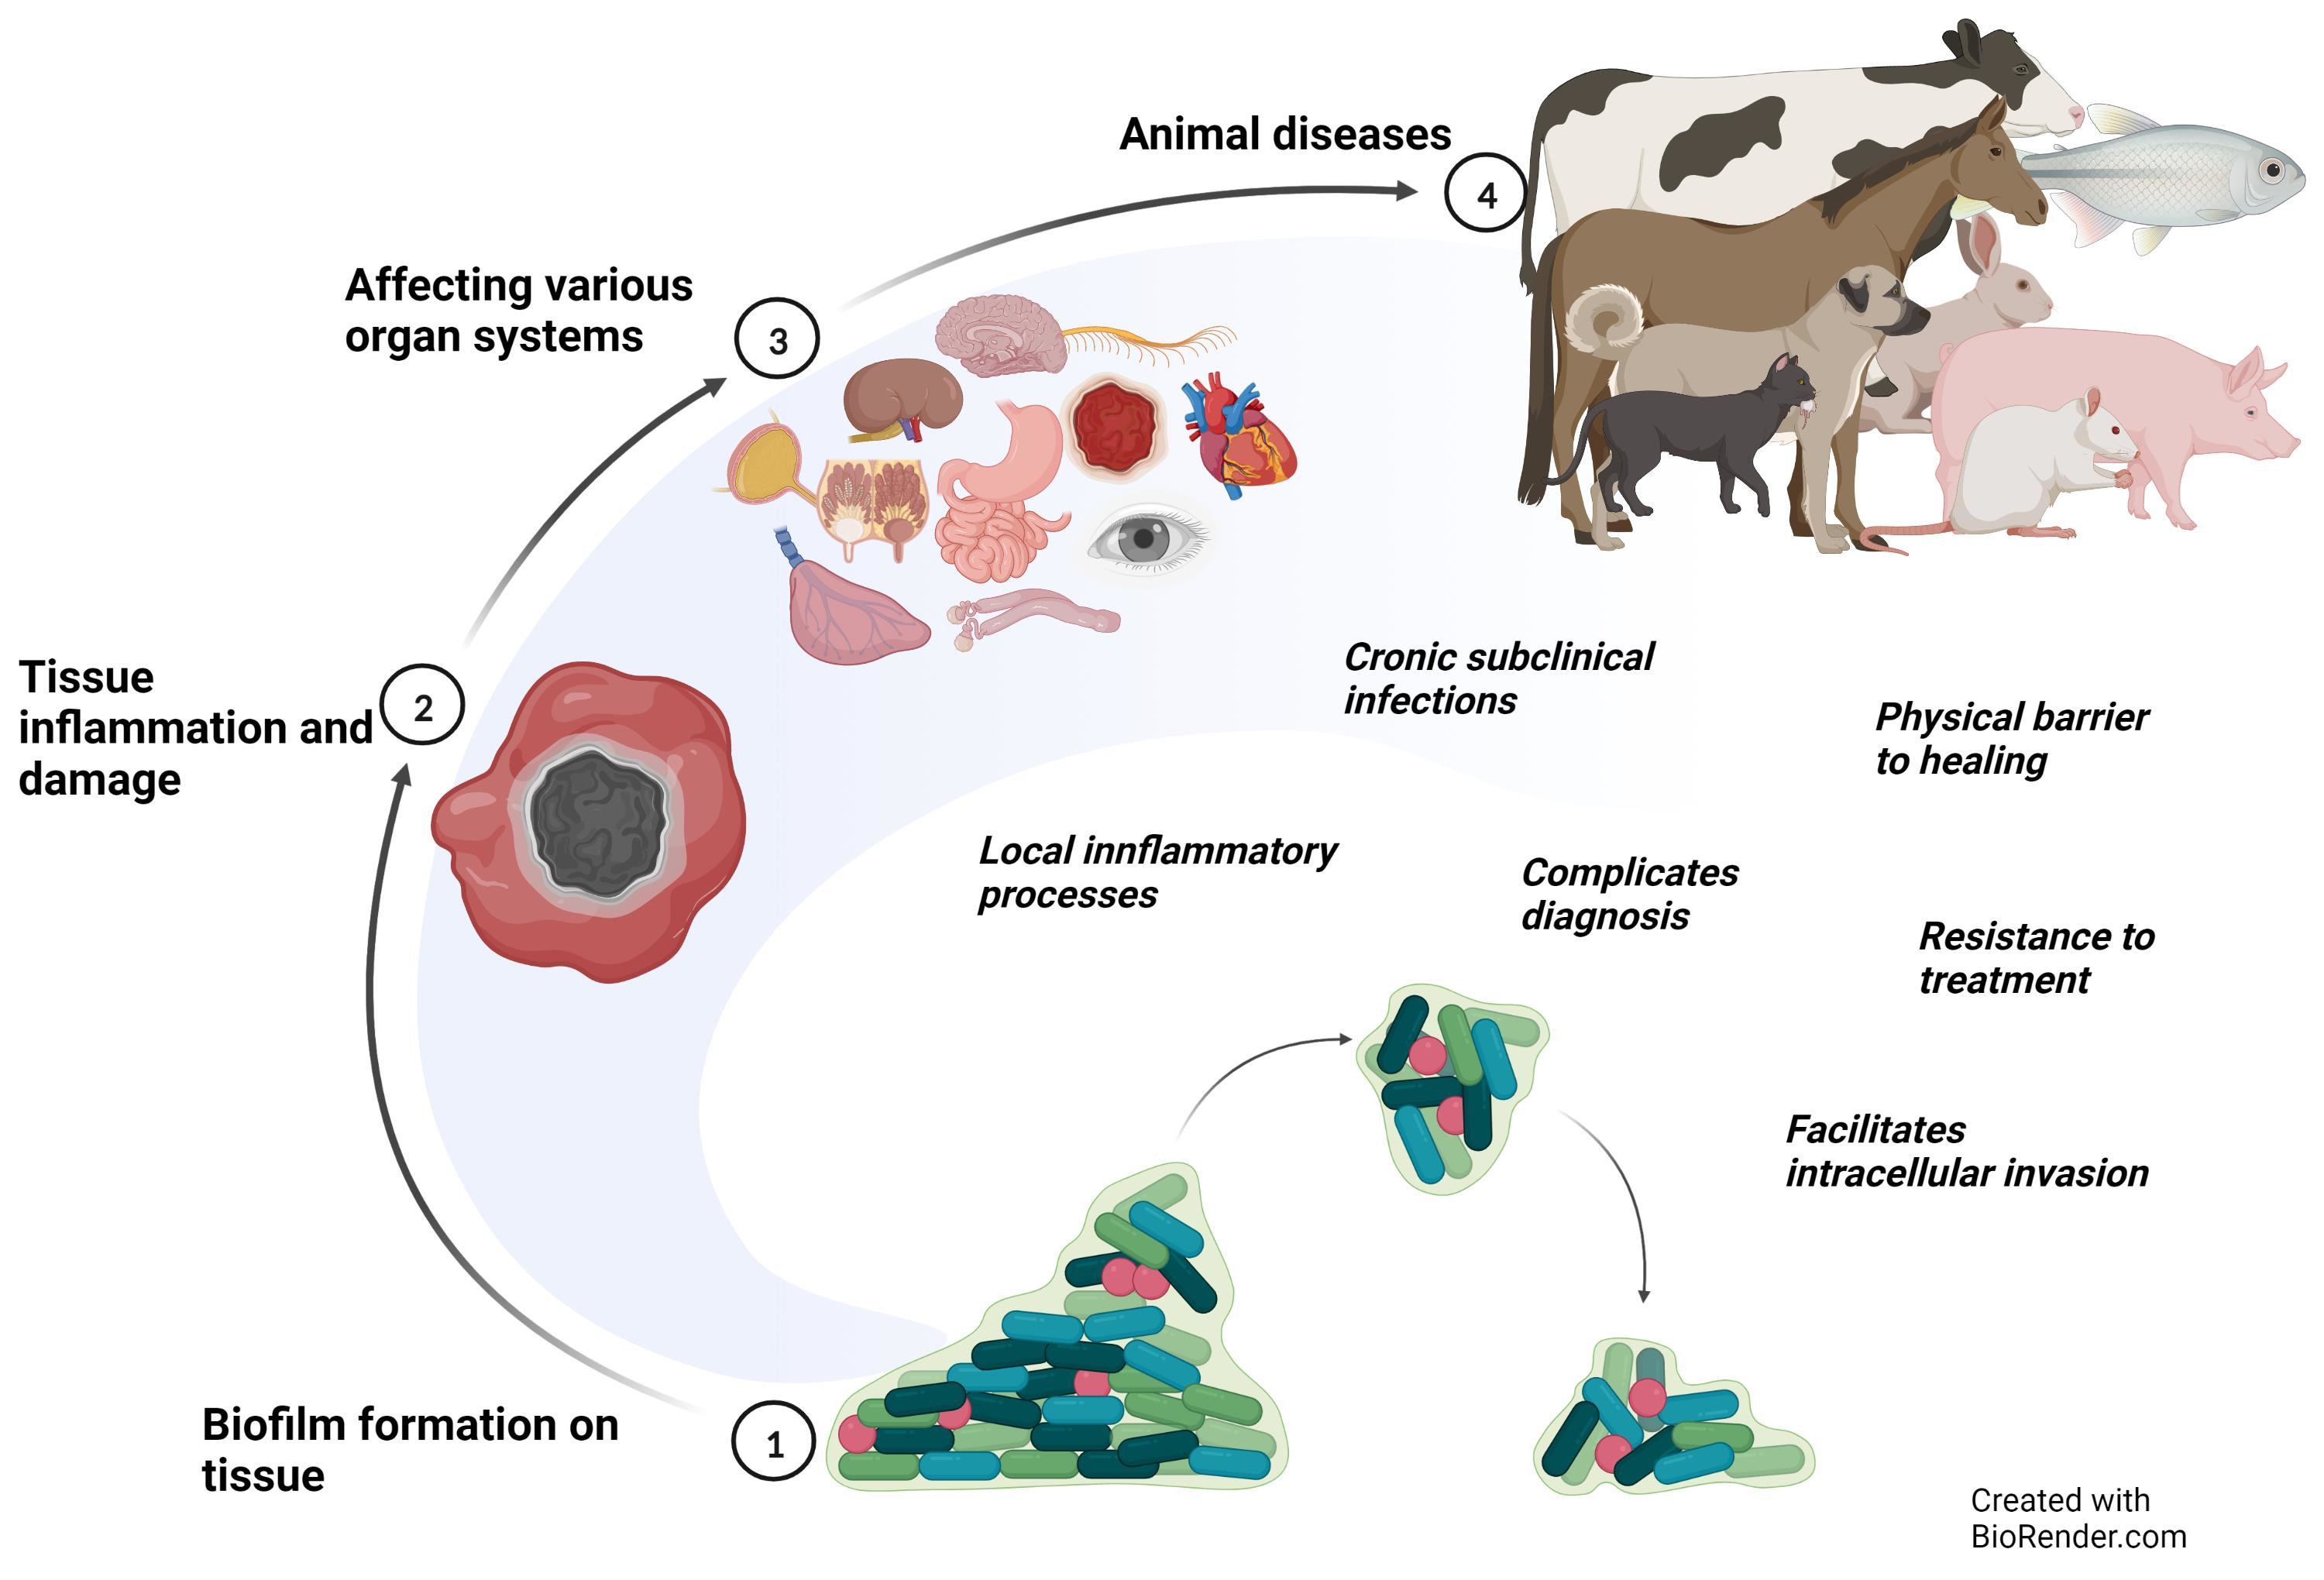 research work on disease caused by microorganisms in animals